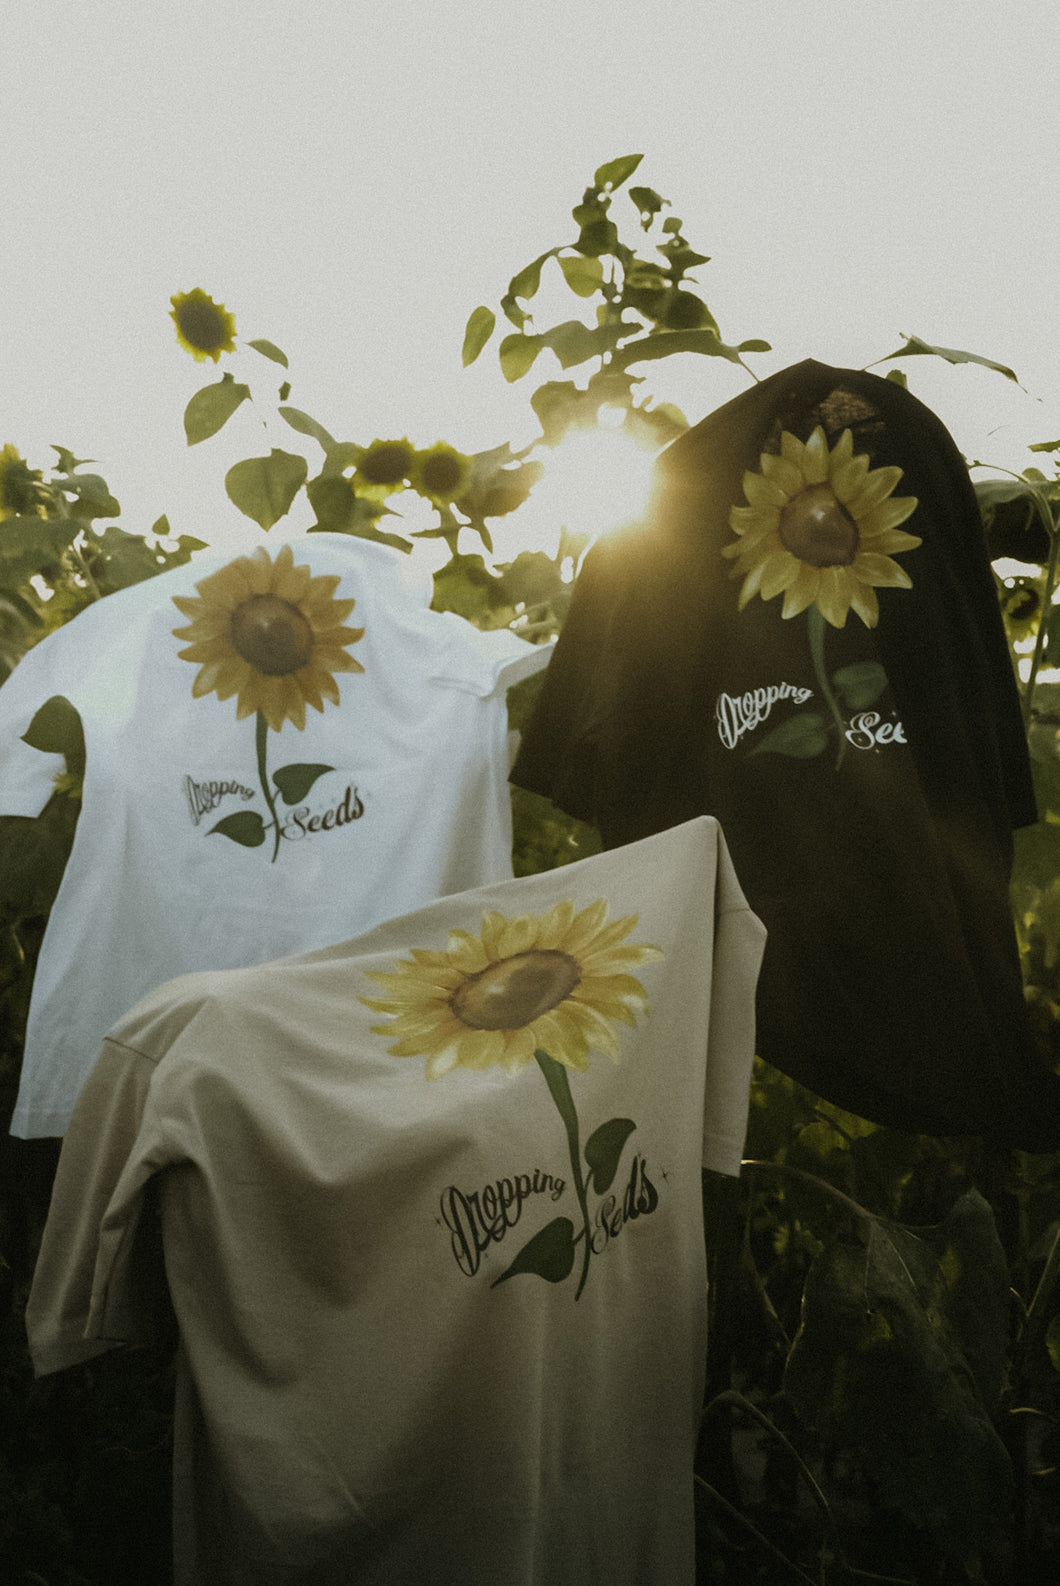 Dropping Seeds Tee